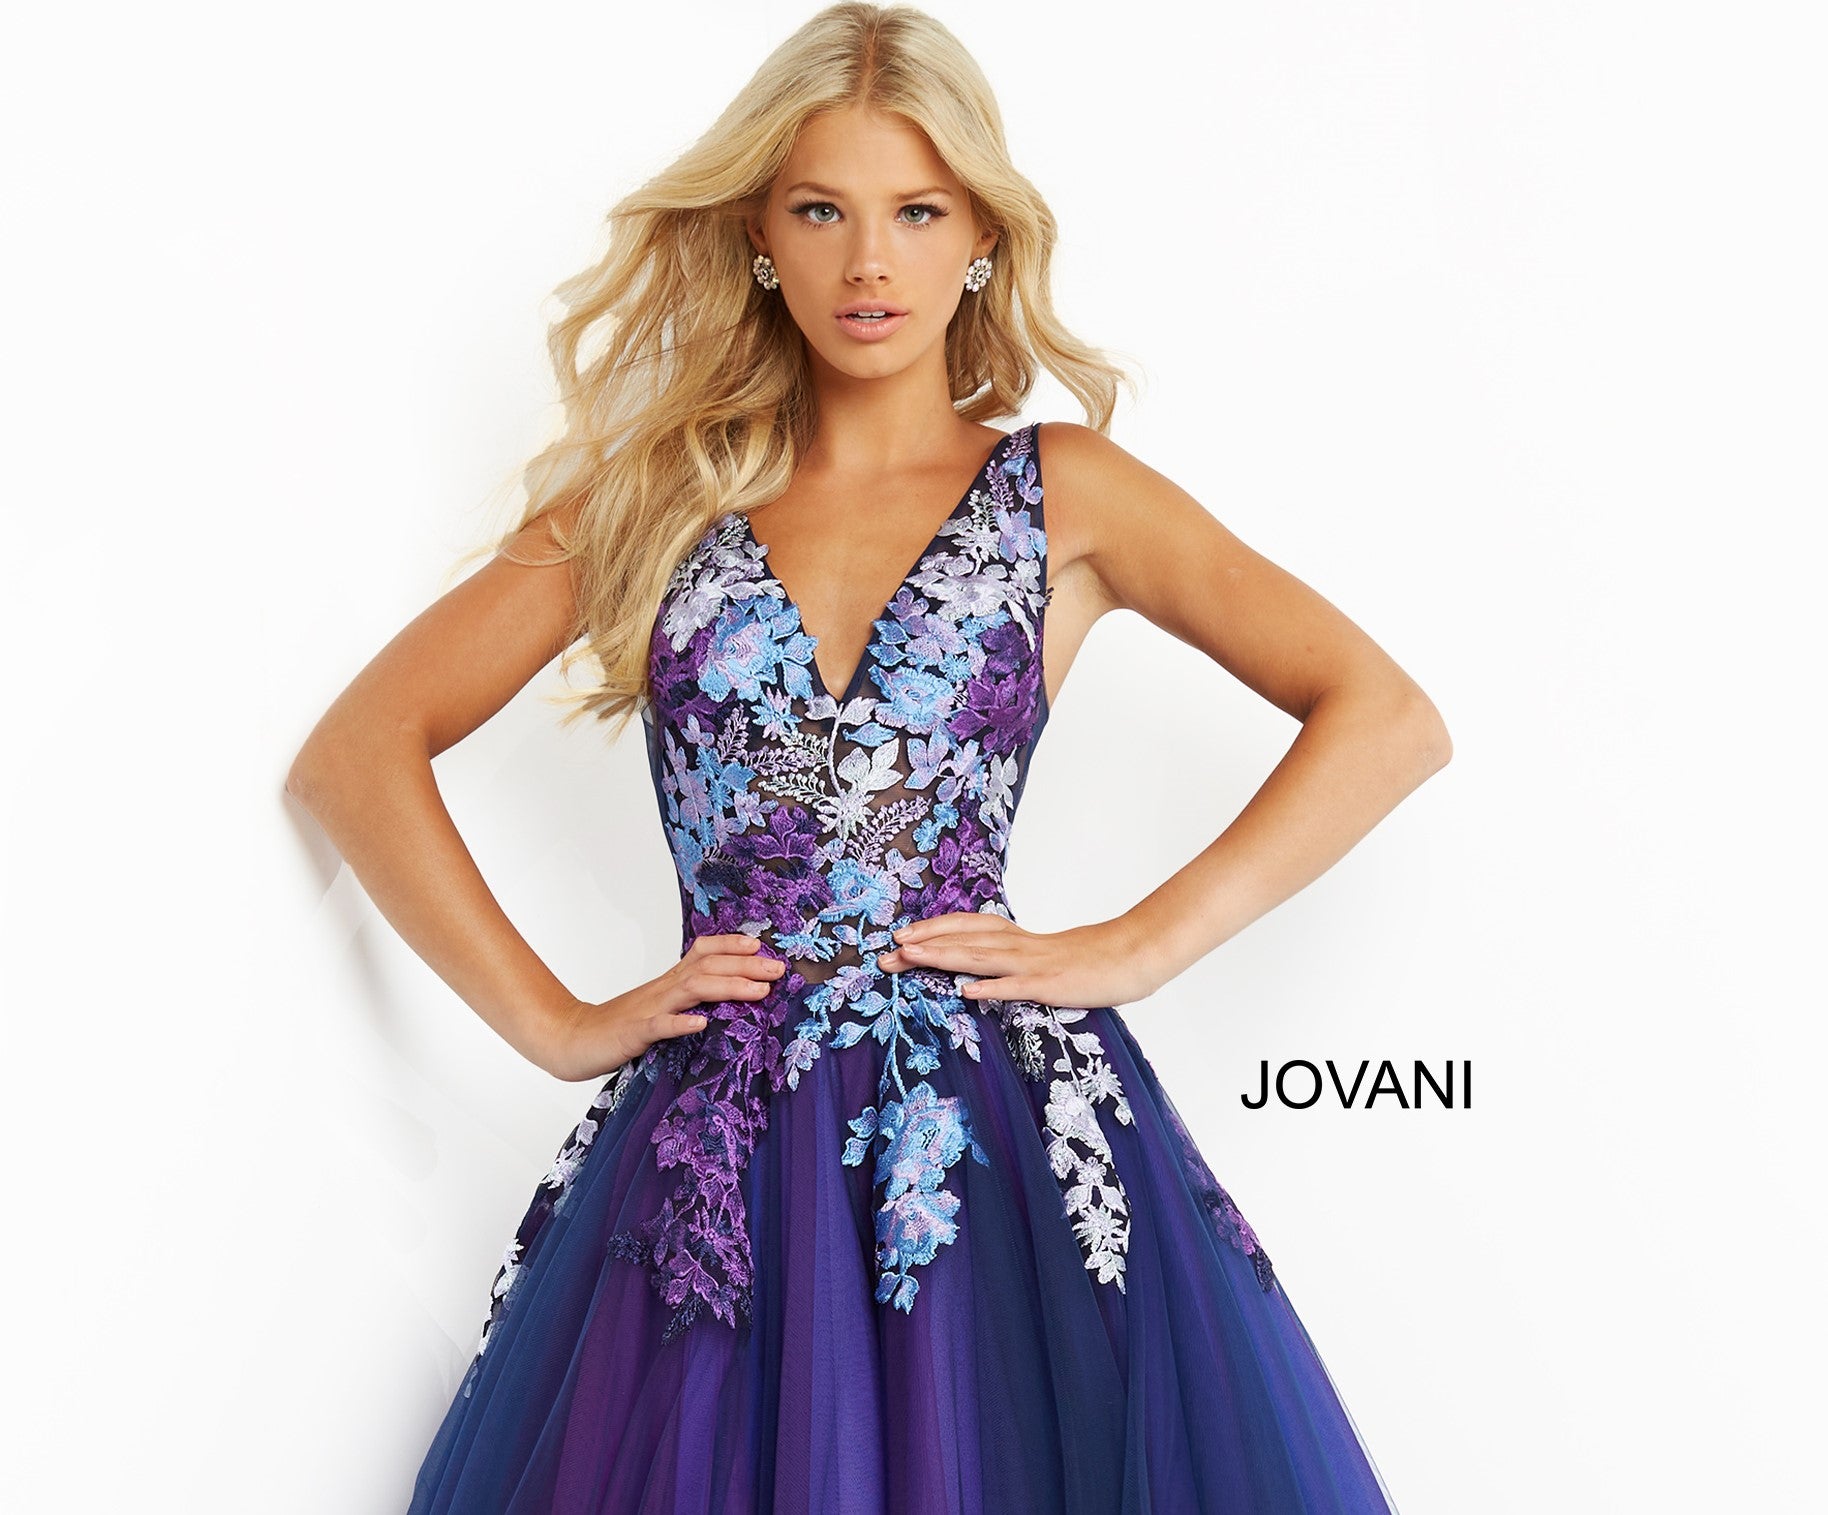 Jovani-06807-NAVY-MULTI-prom-dress-close-up-floral-embroidered-bodice-v-neckline-ball-gown